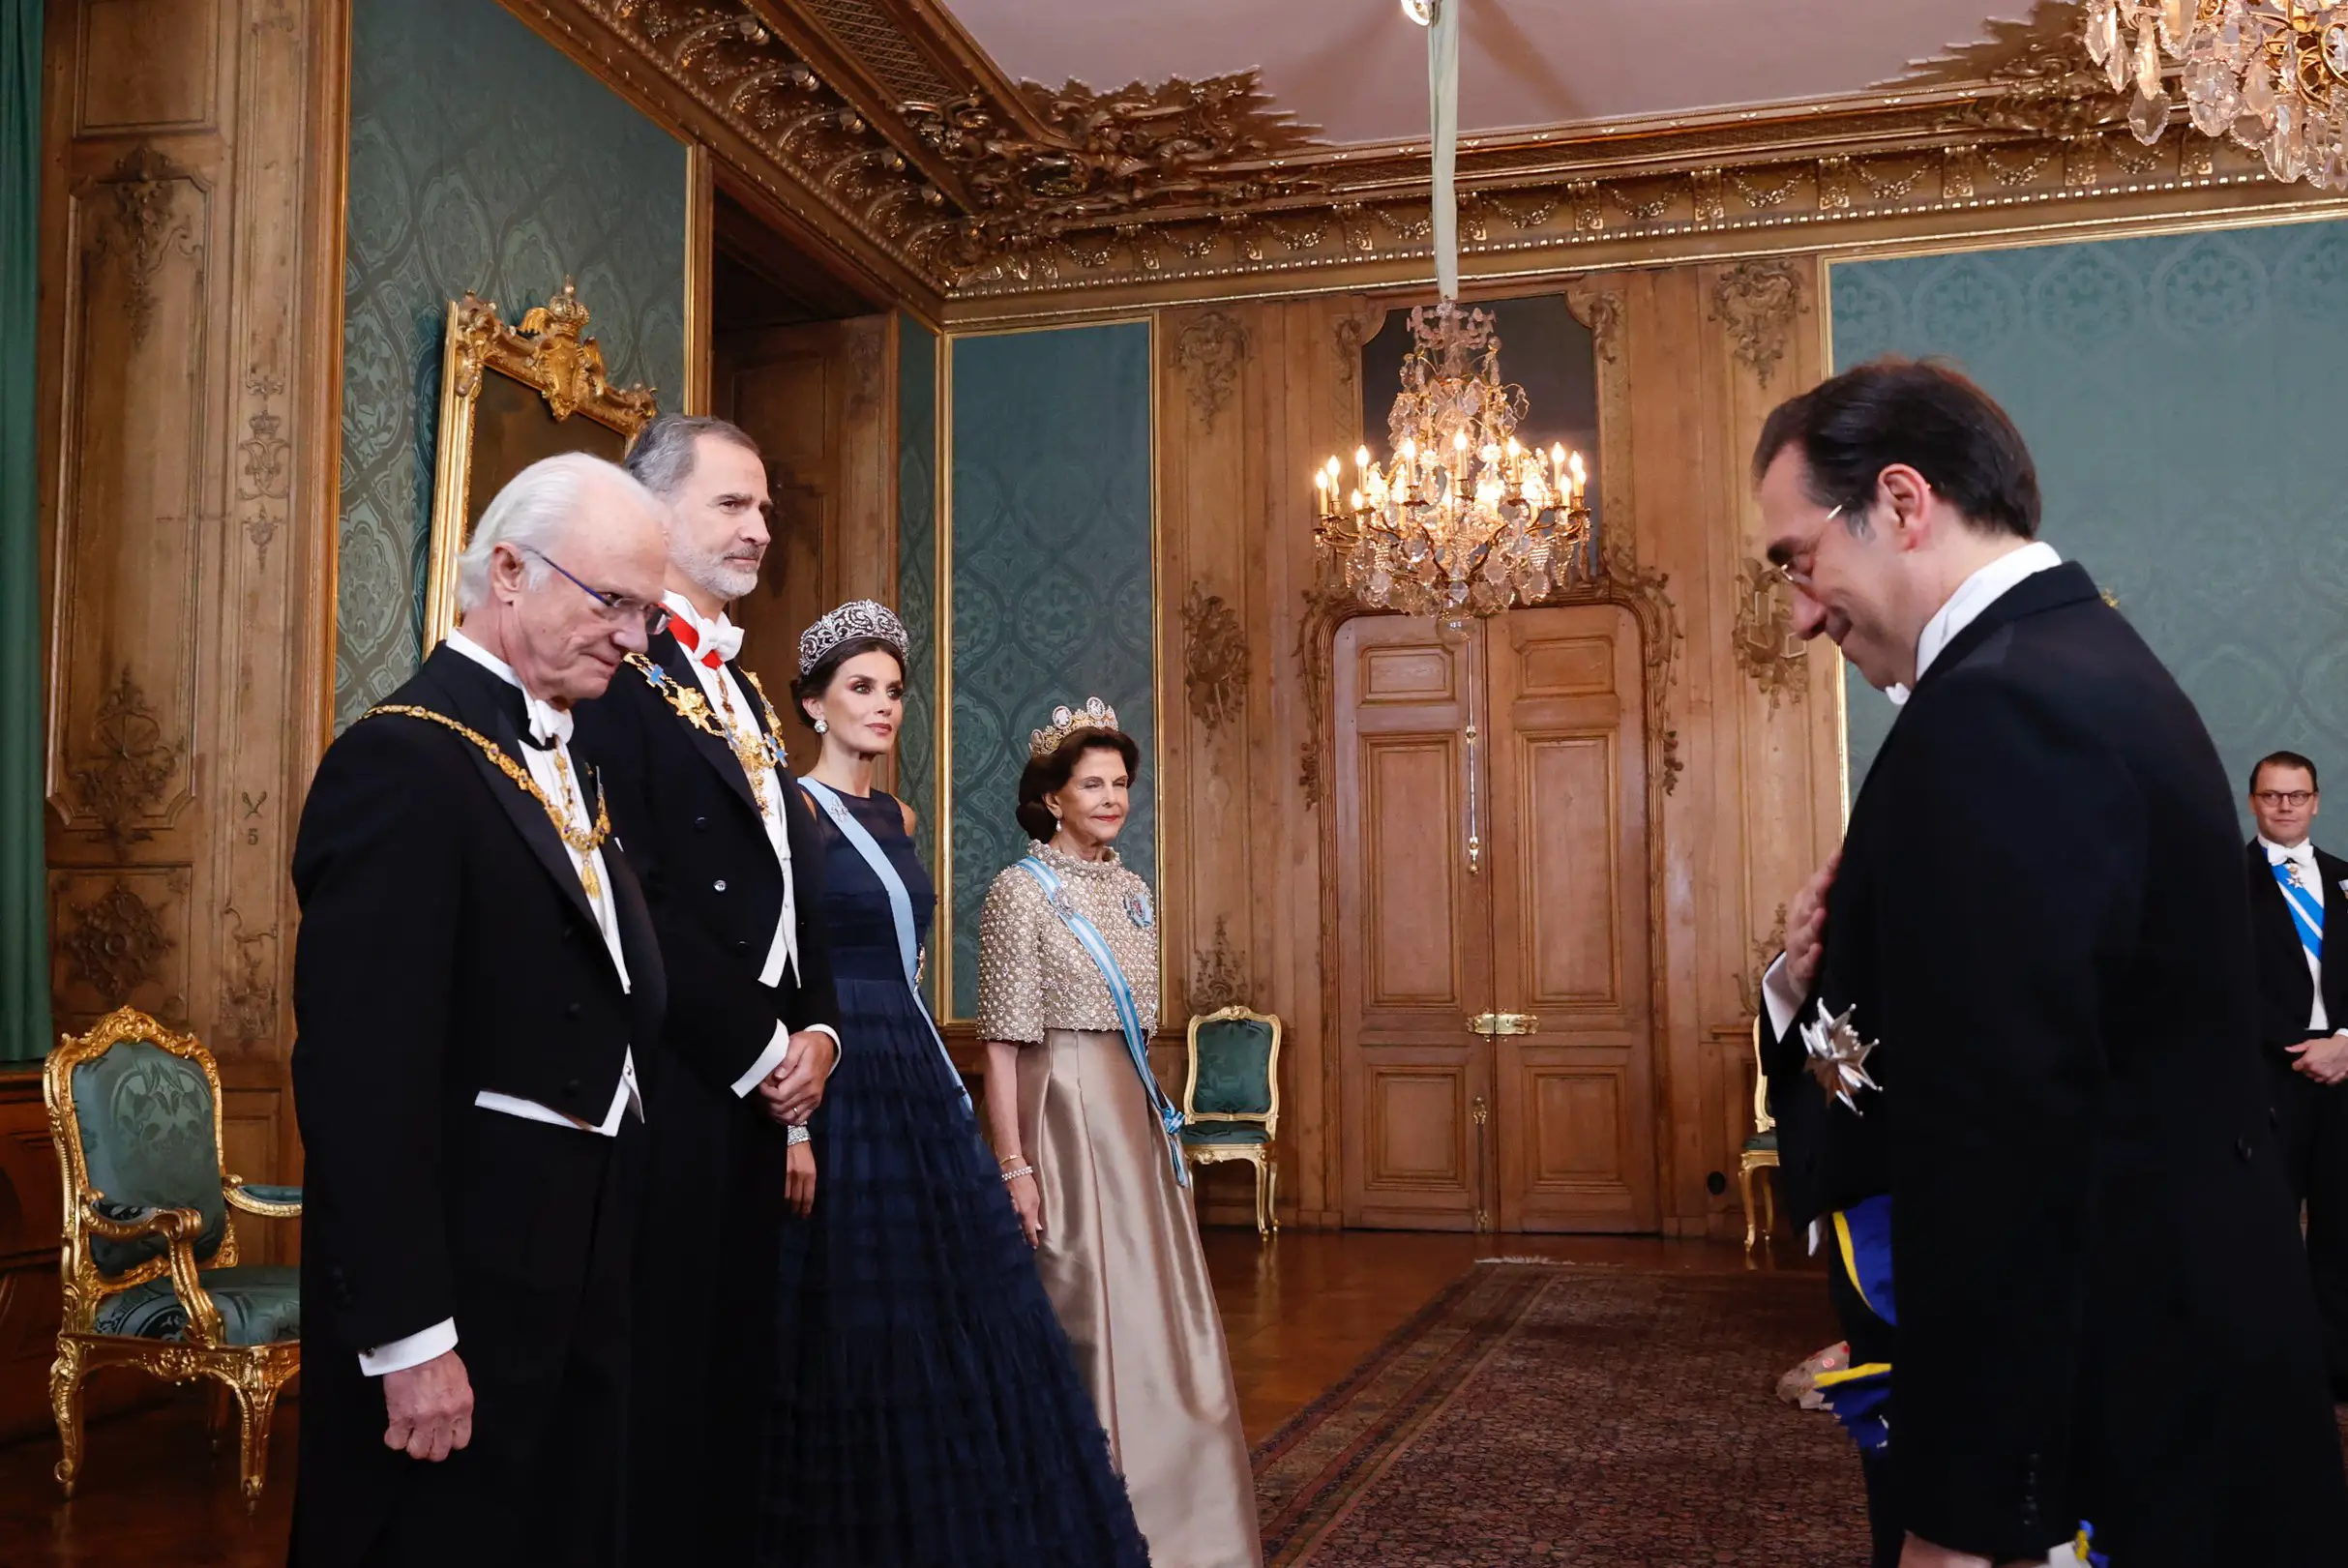 King Felipe and Queen Letizia at the state banquet in Sweden